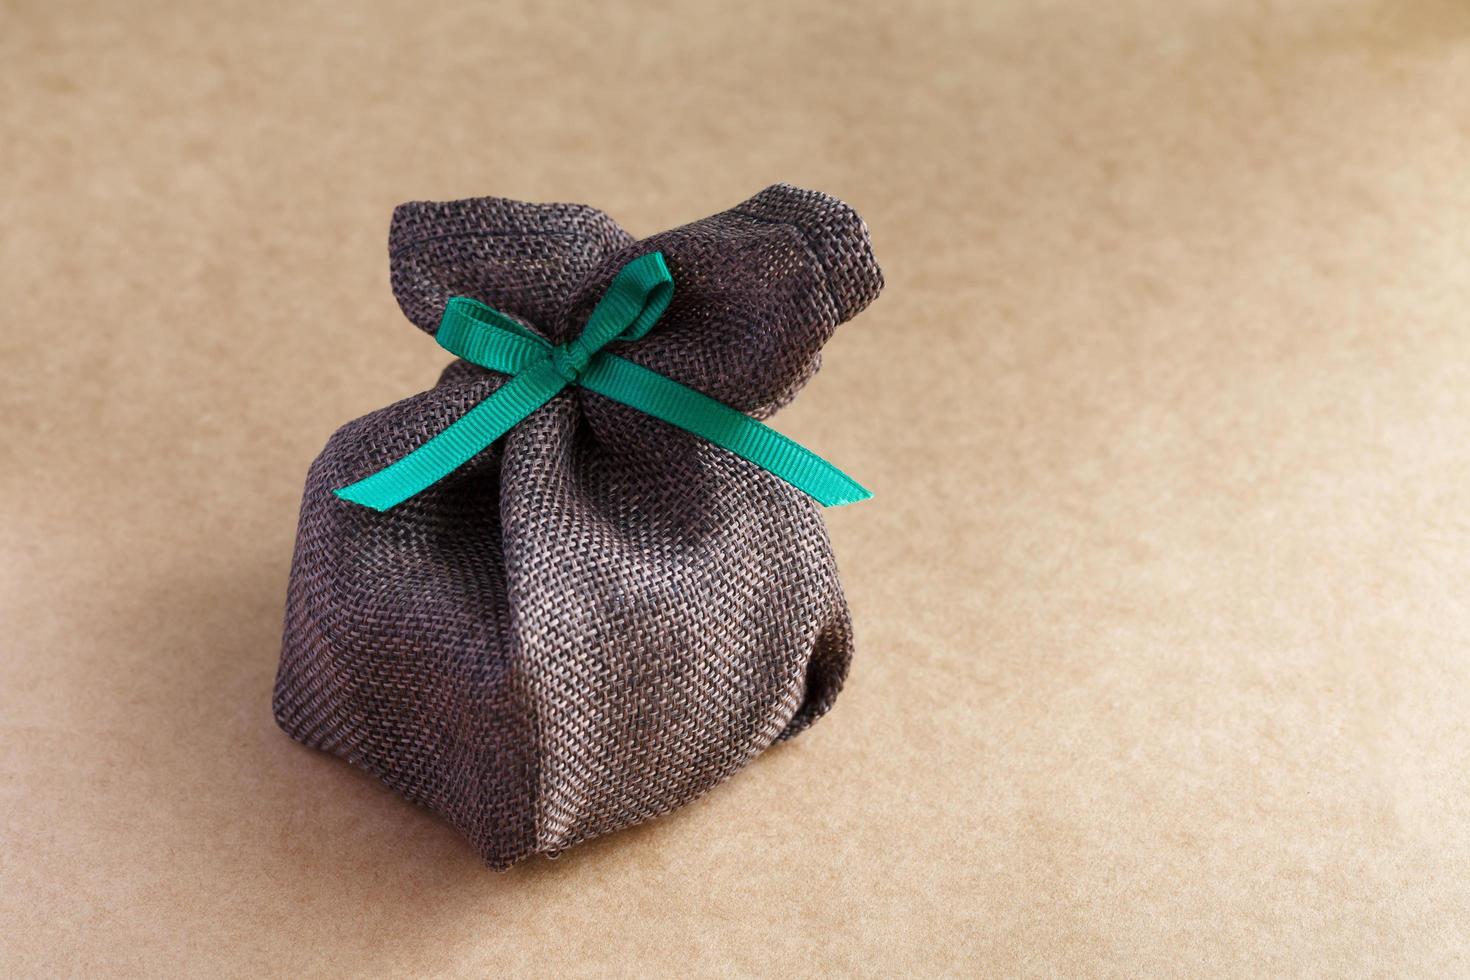 sack gift bag with ribbon bow on brown background photo